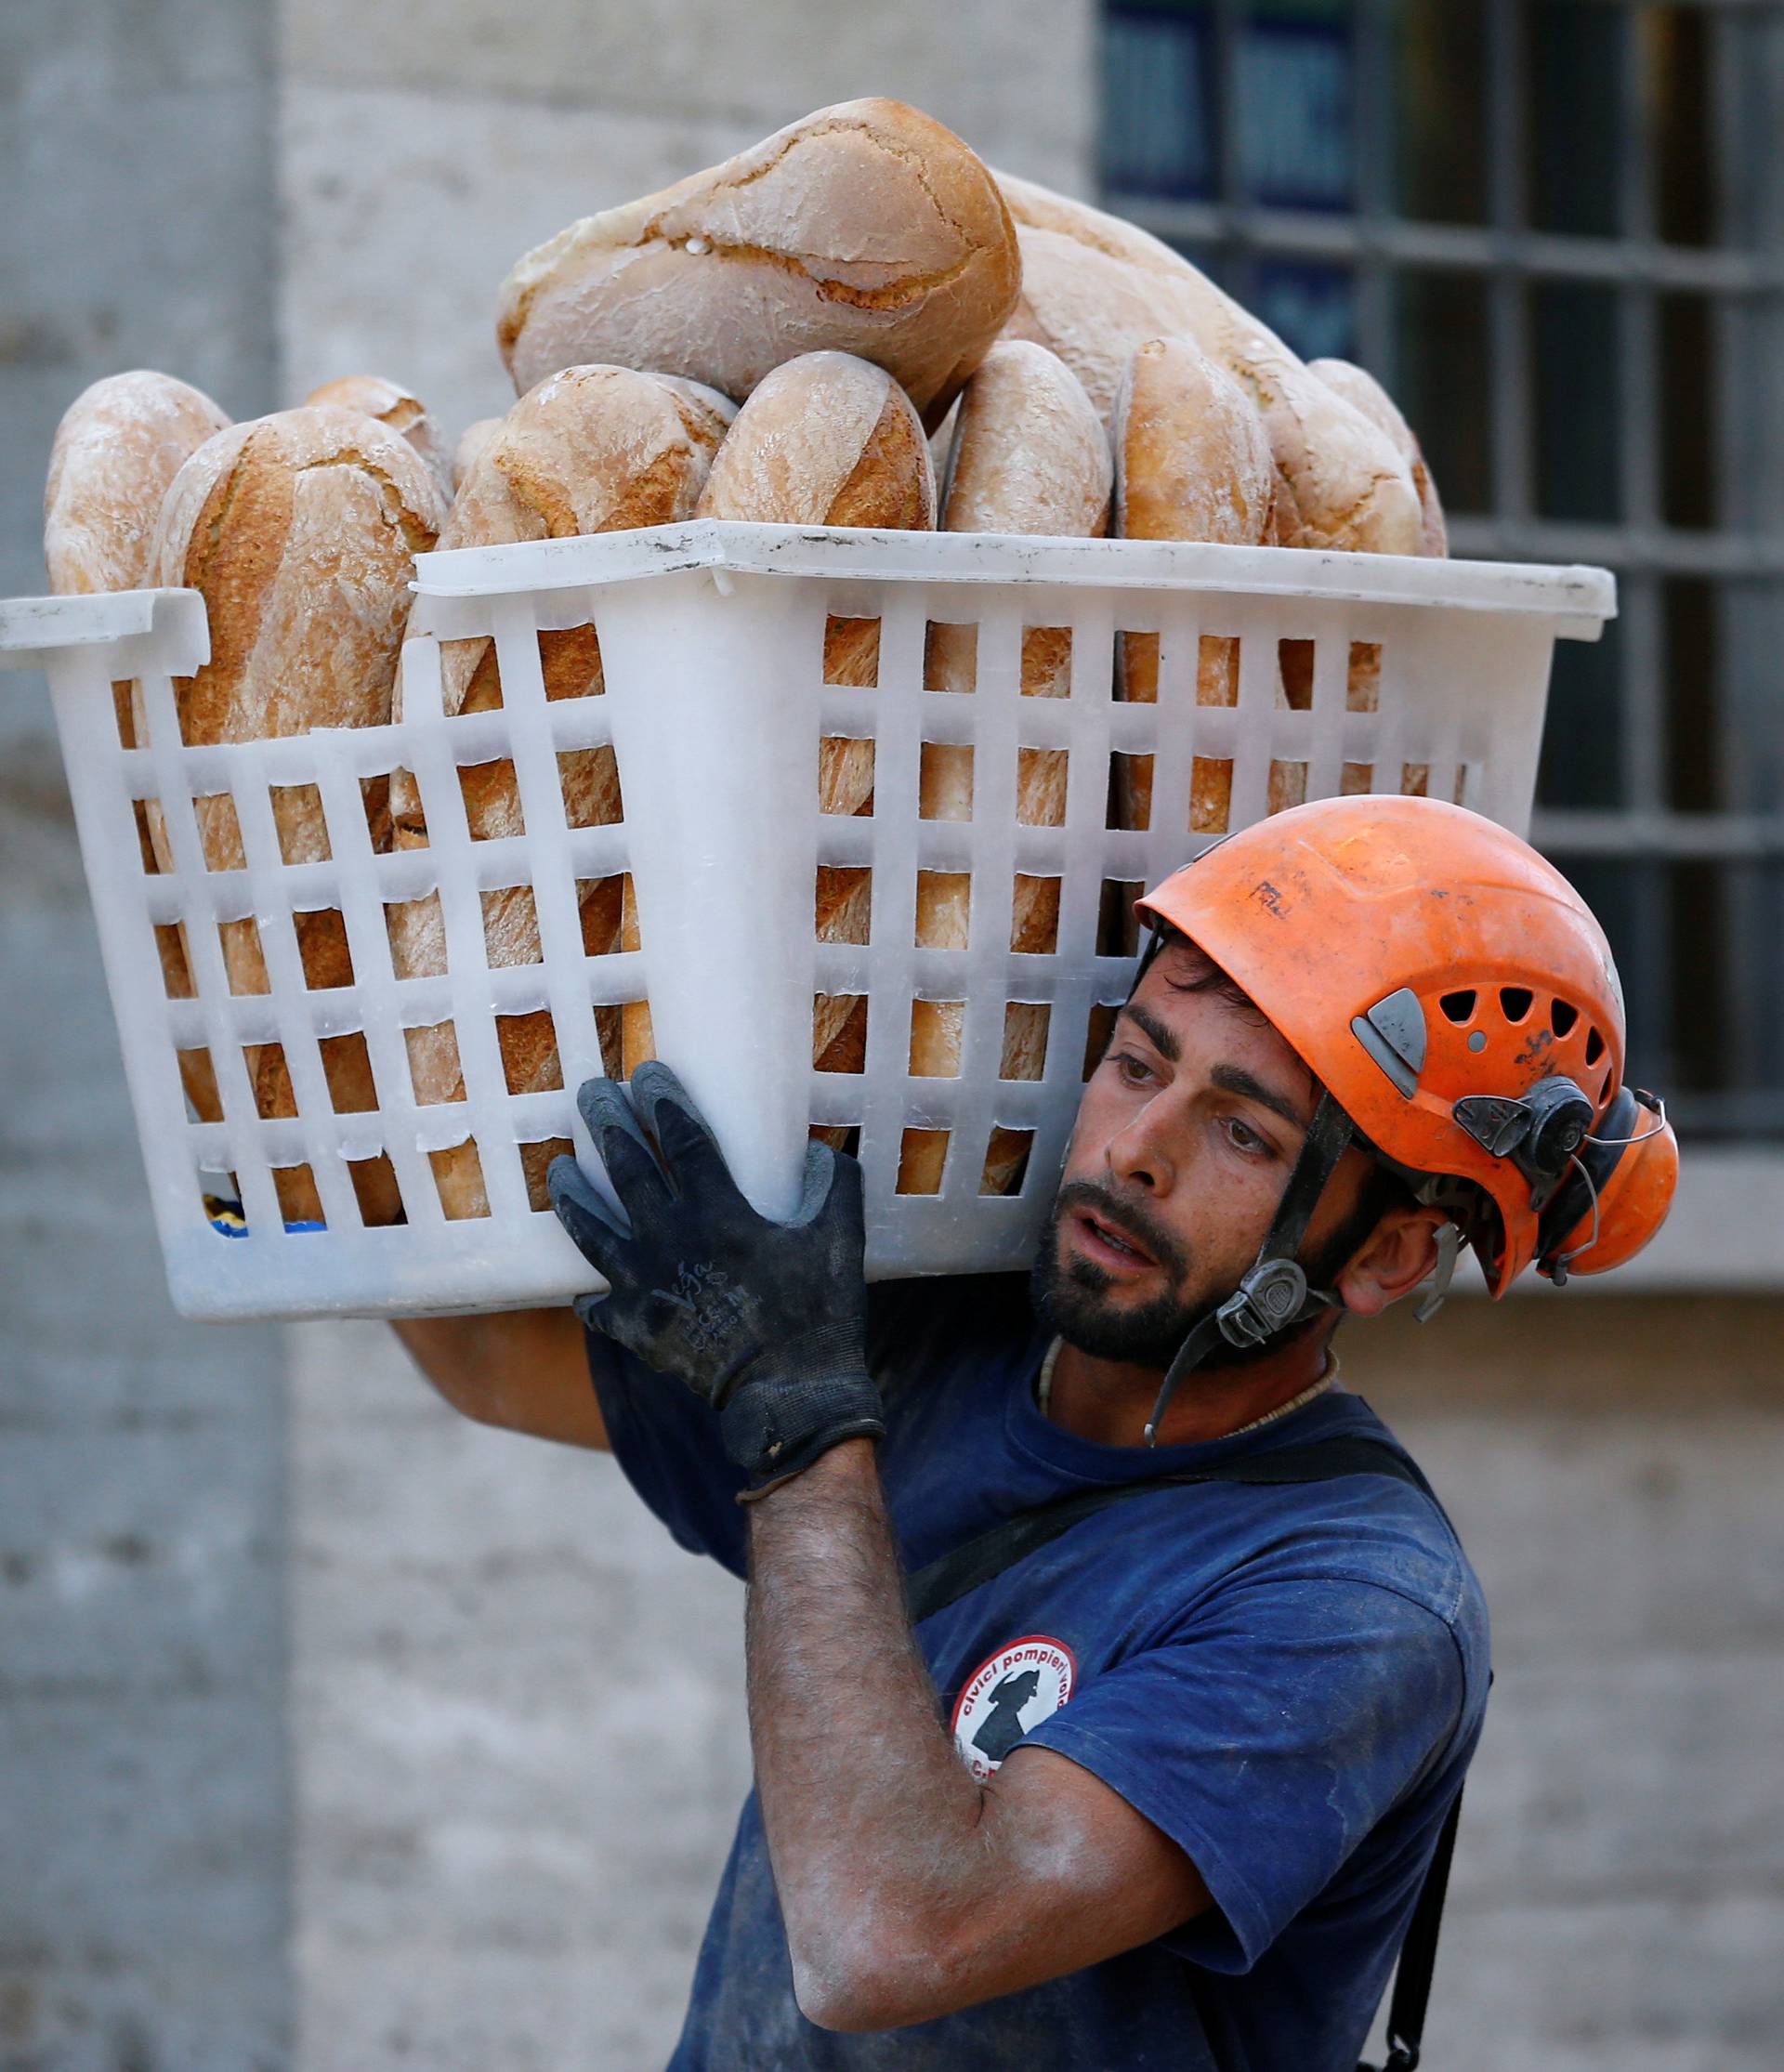 A rescuer carries bread following the earthquake in Amatrice